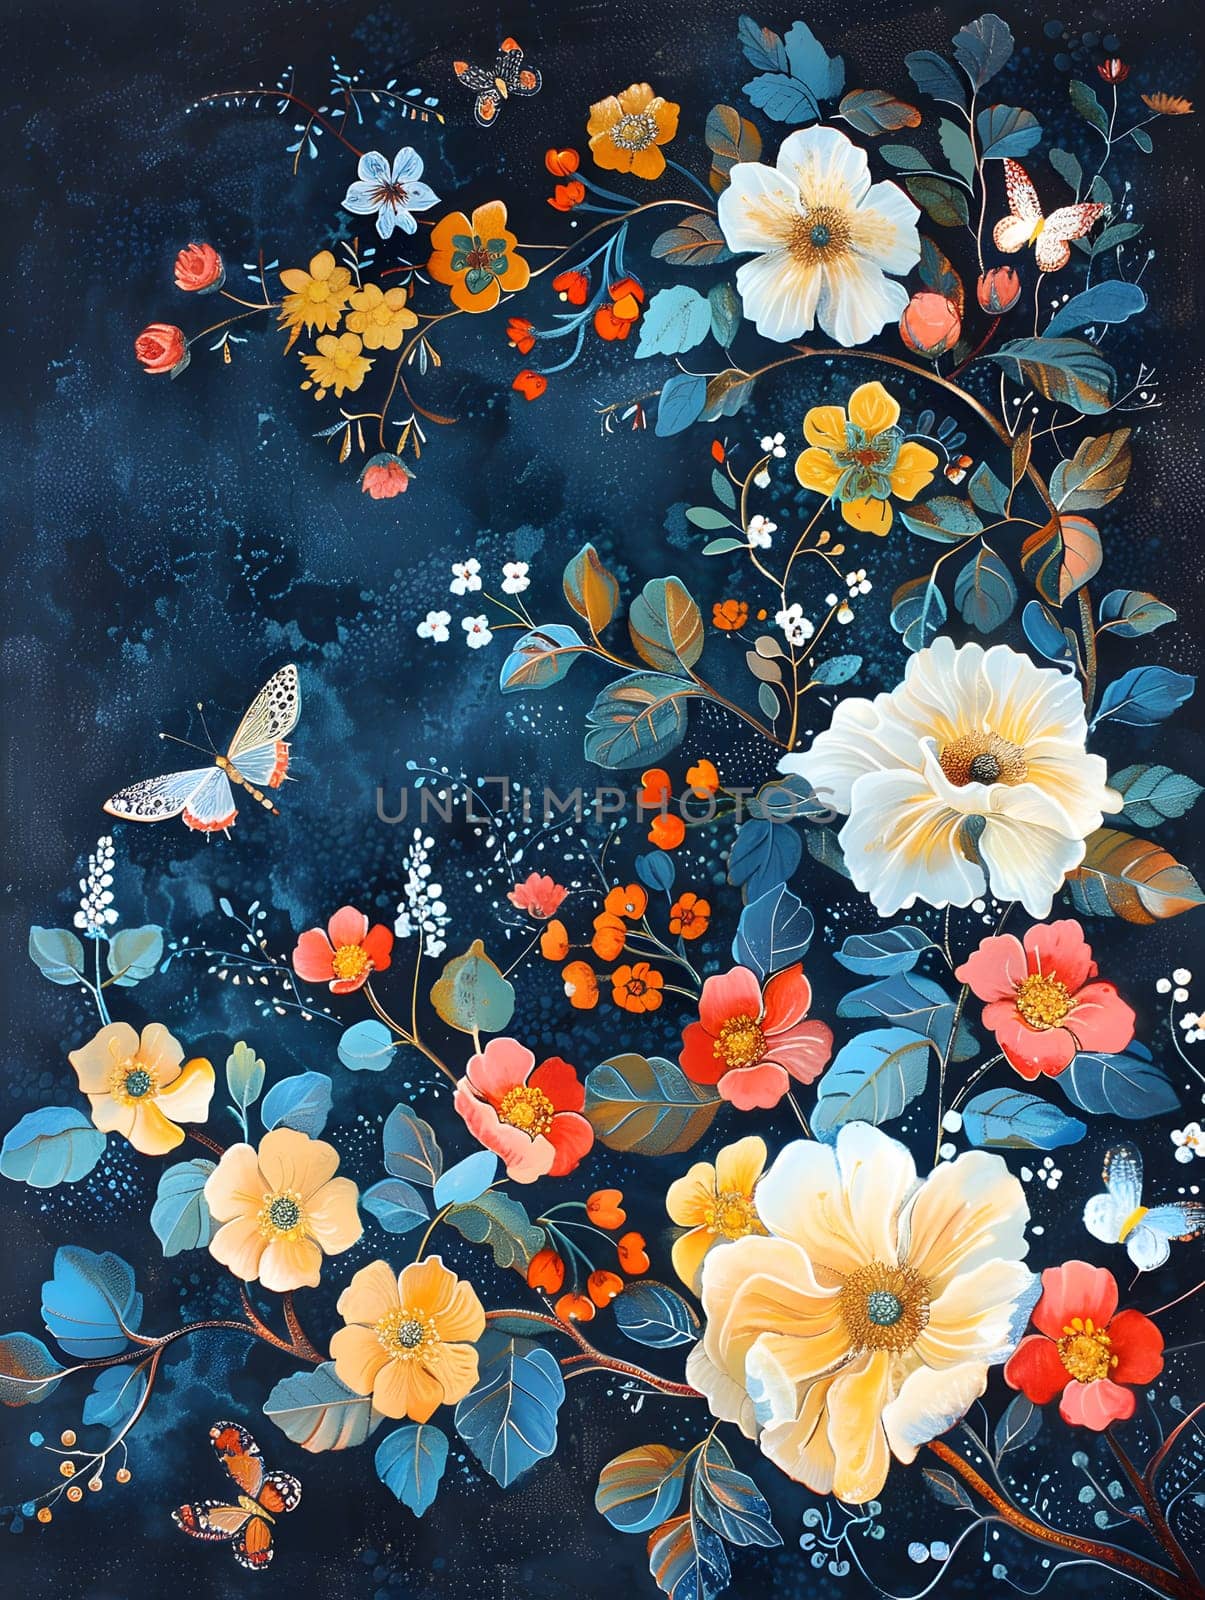 Flowers and butterflies painted on dark background, a beautiful floral design by Nadtochiy